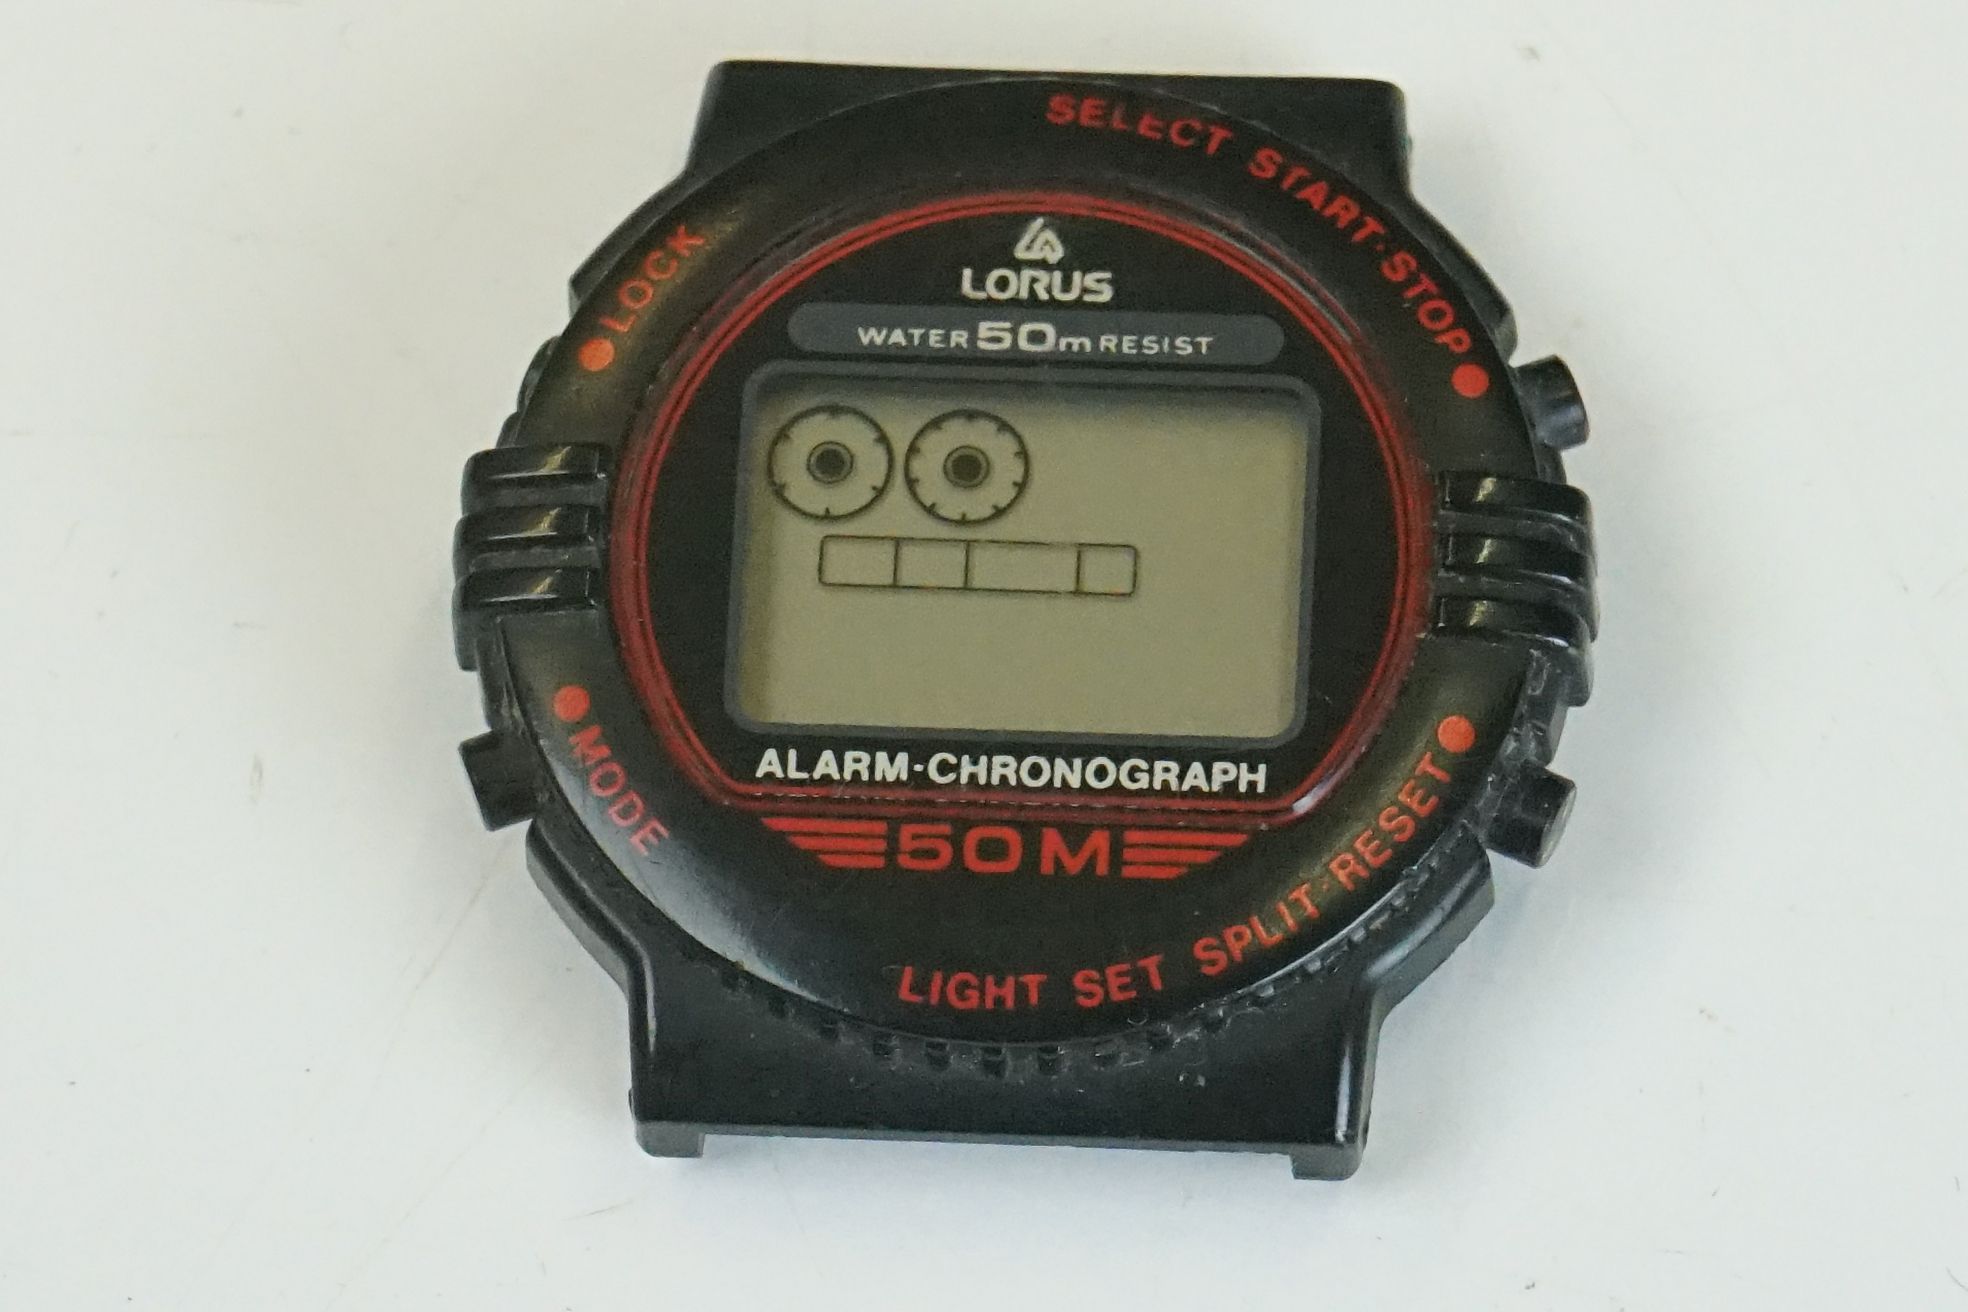 Collection of LCD Watches including Seiko, Casio, Lambda, etc - Image 9 of 14